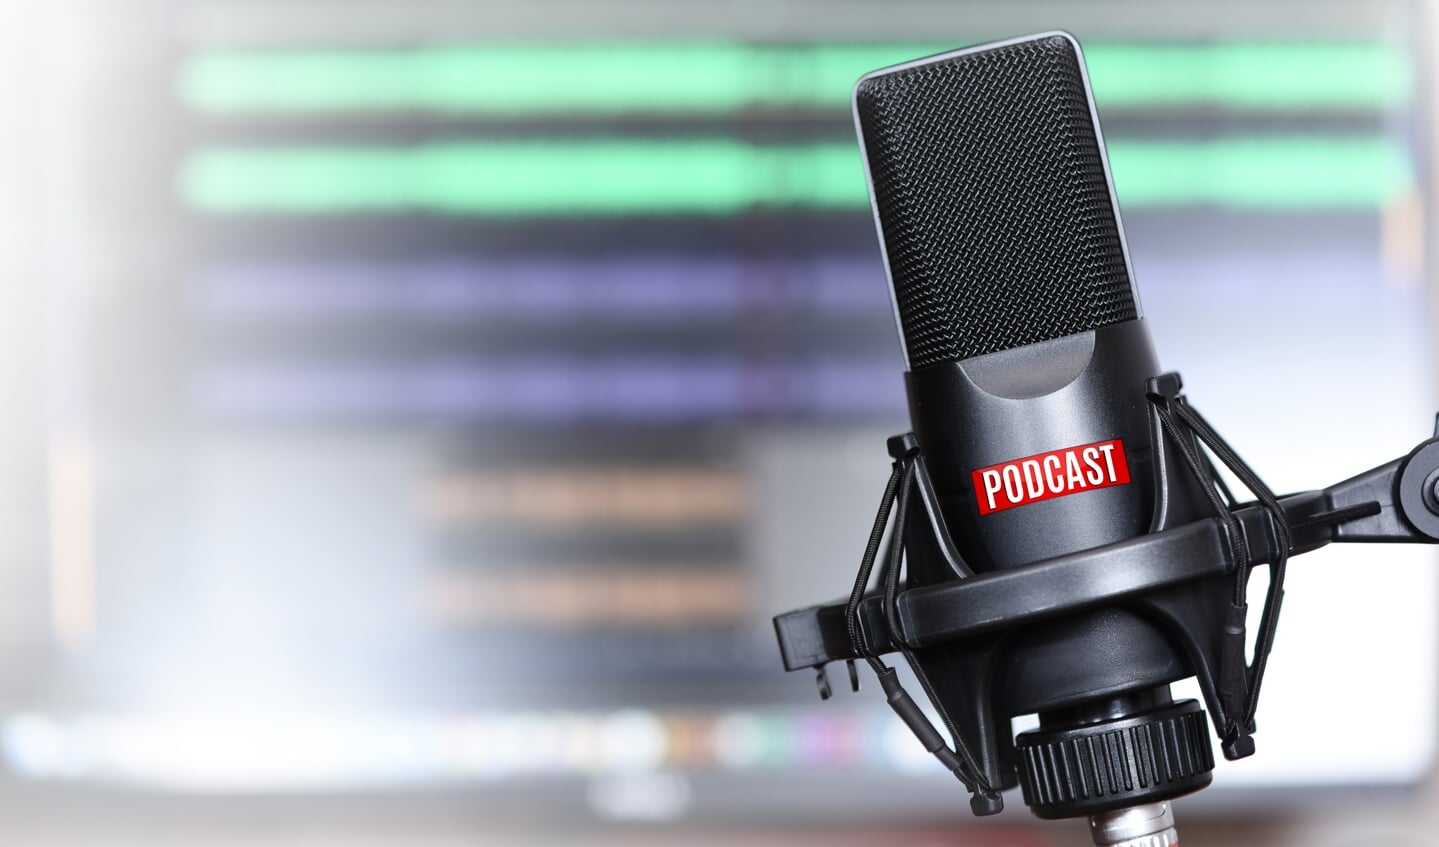 studio microphone with a podcast icon close up